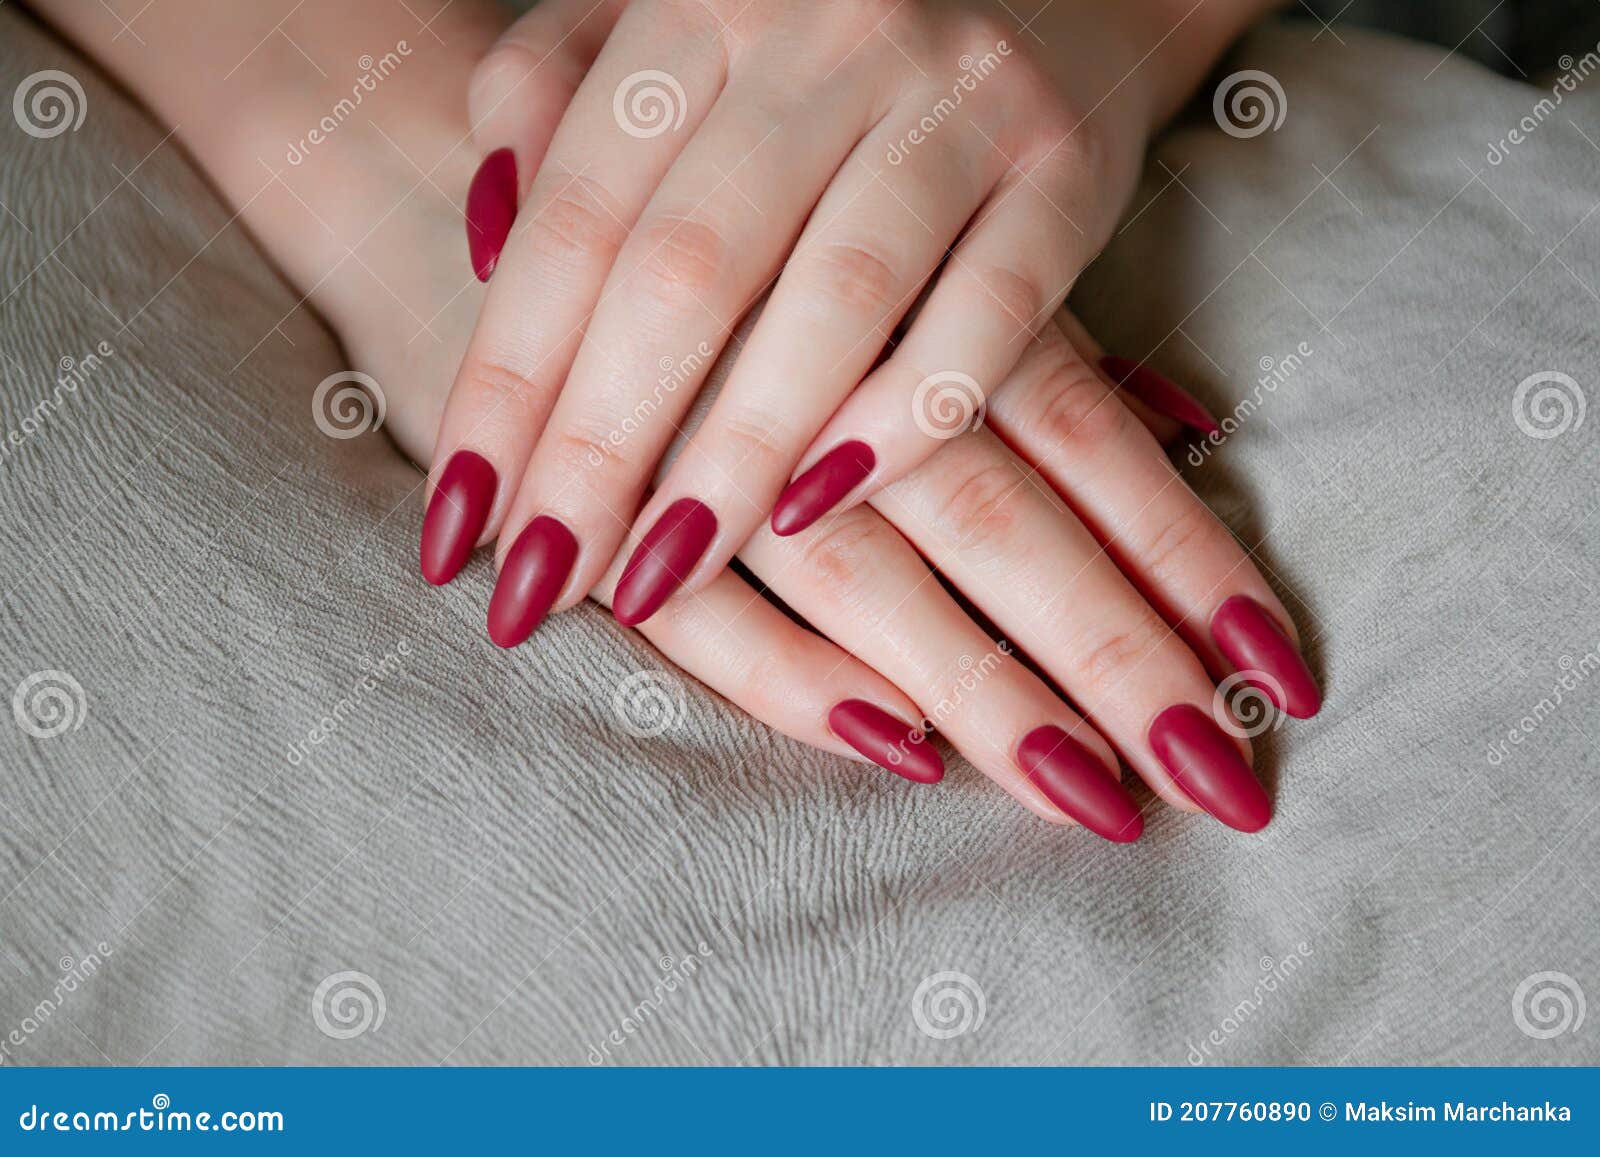 Red Shellac Nail Designs for Long Nails - wide 1